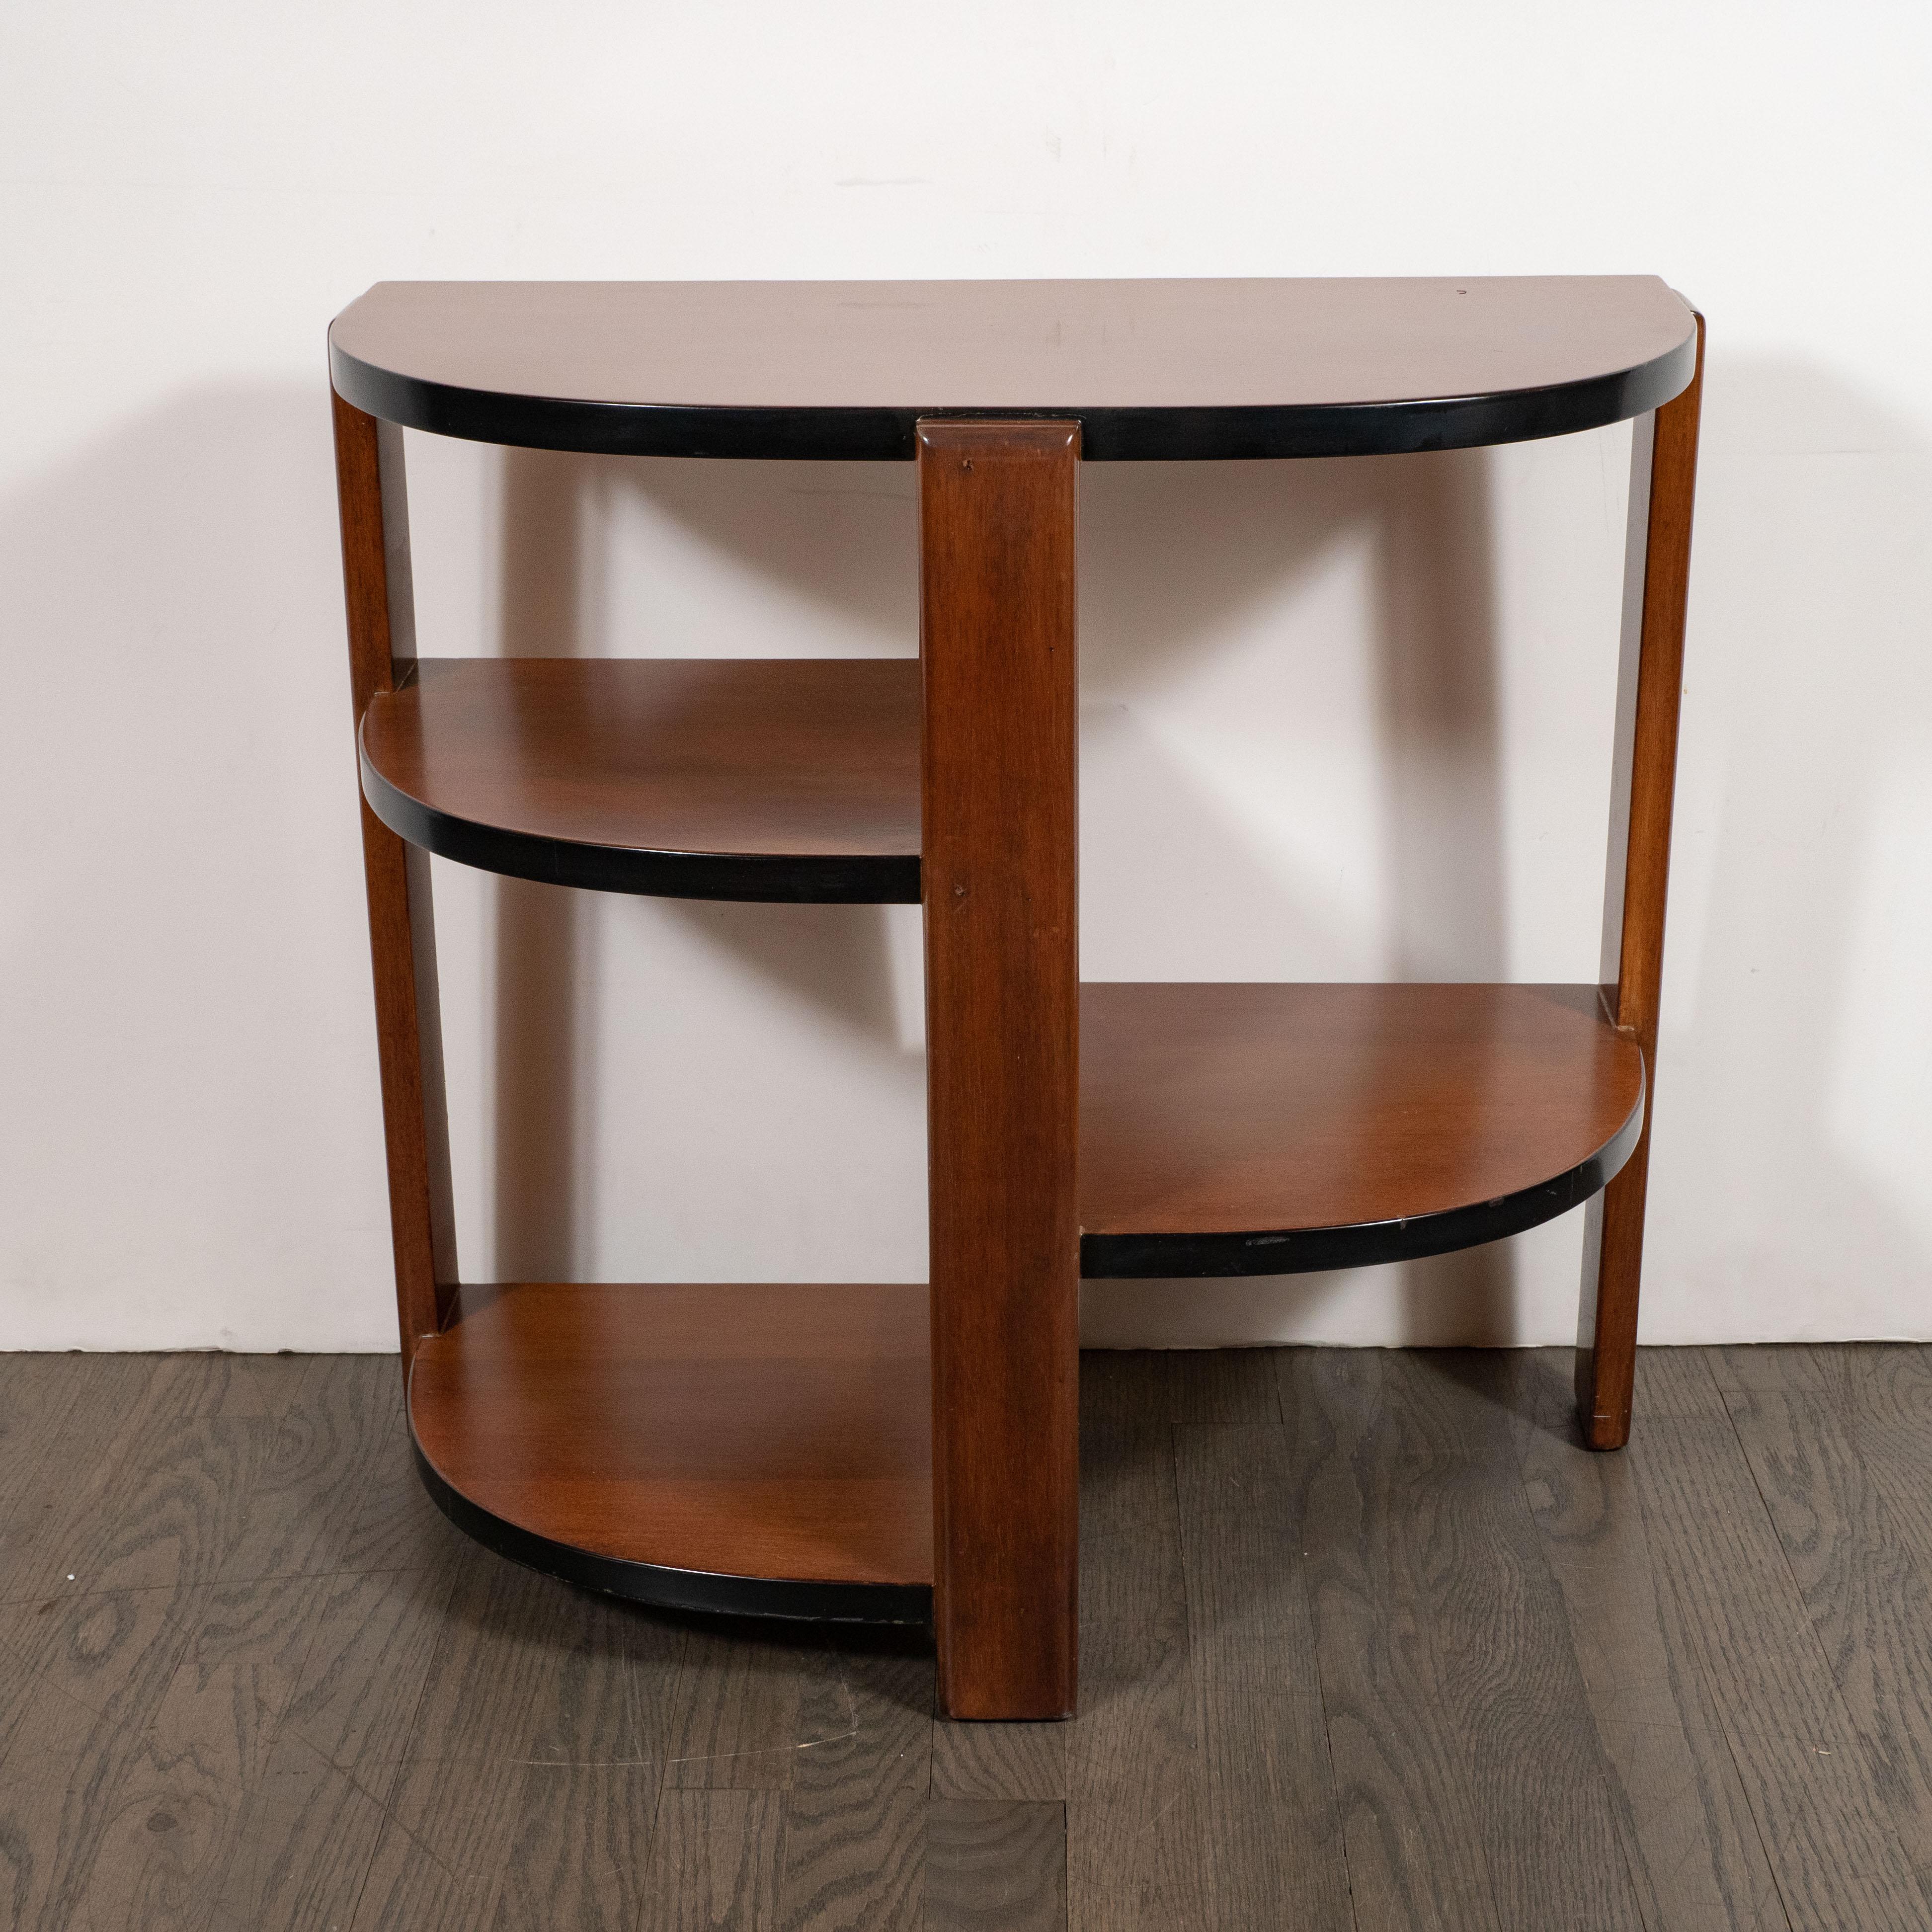 This elegant Art Deco Machine Age cubist end/side table was realized in the United States, circa 1935. It features a demilune top and three streamlined planes that connect to a central support at a perpendicular angle- all in handrubbed walnut. The